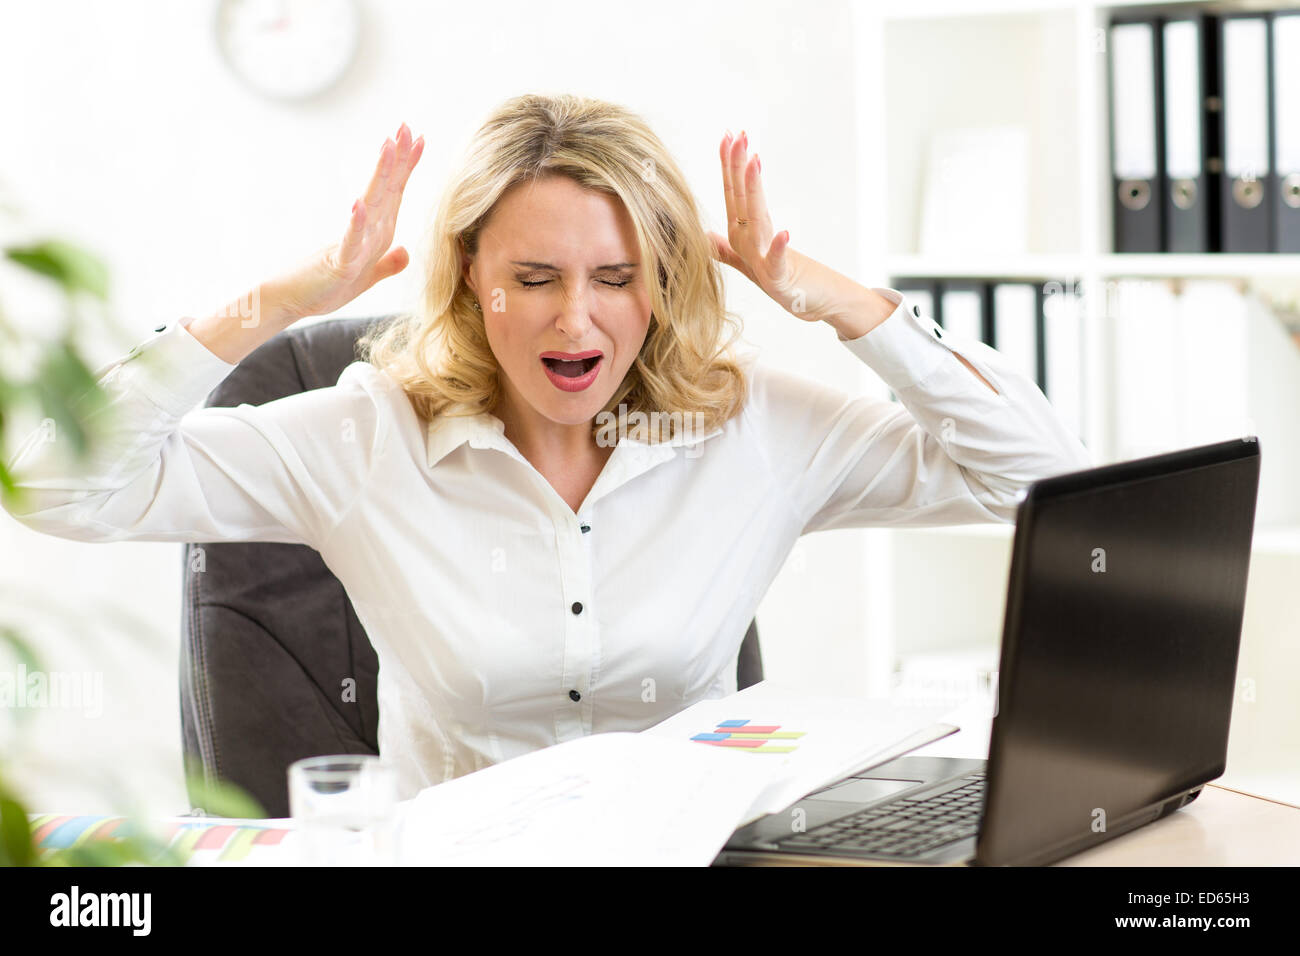 Stressed businesswoman screaming loudly at laptop in office Stock Photo